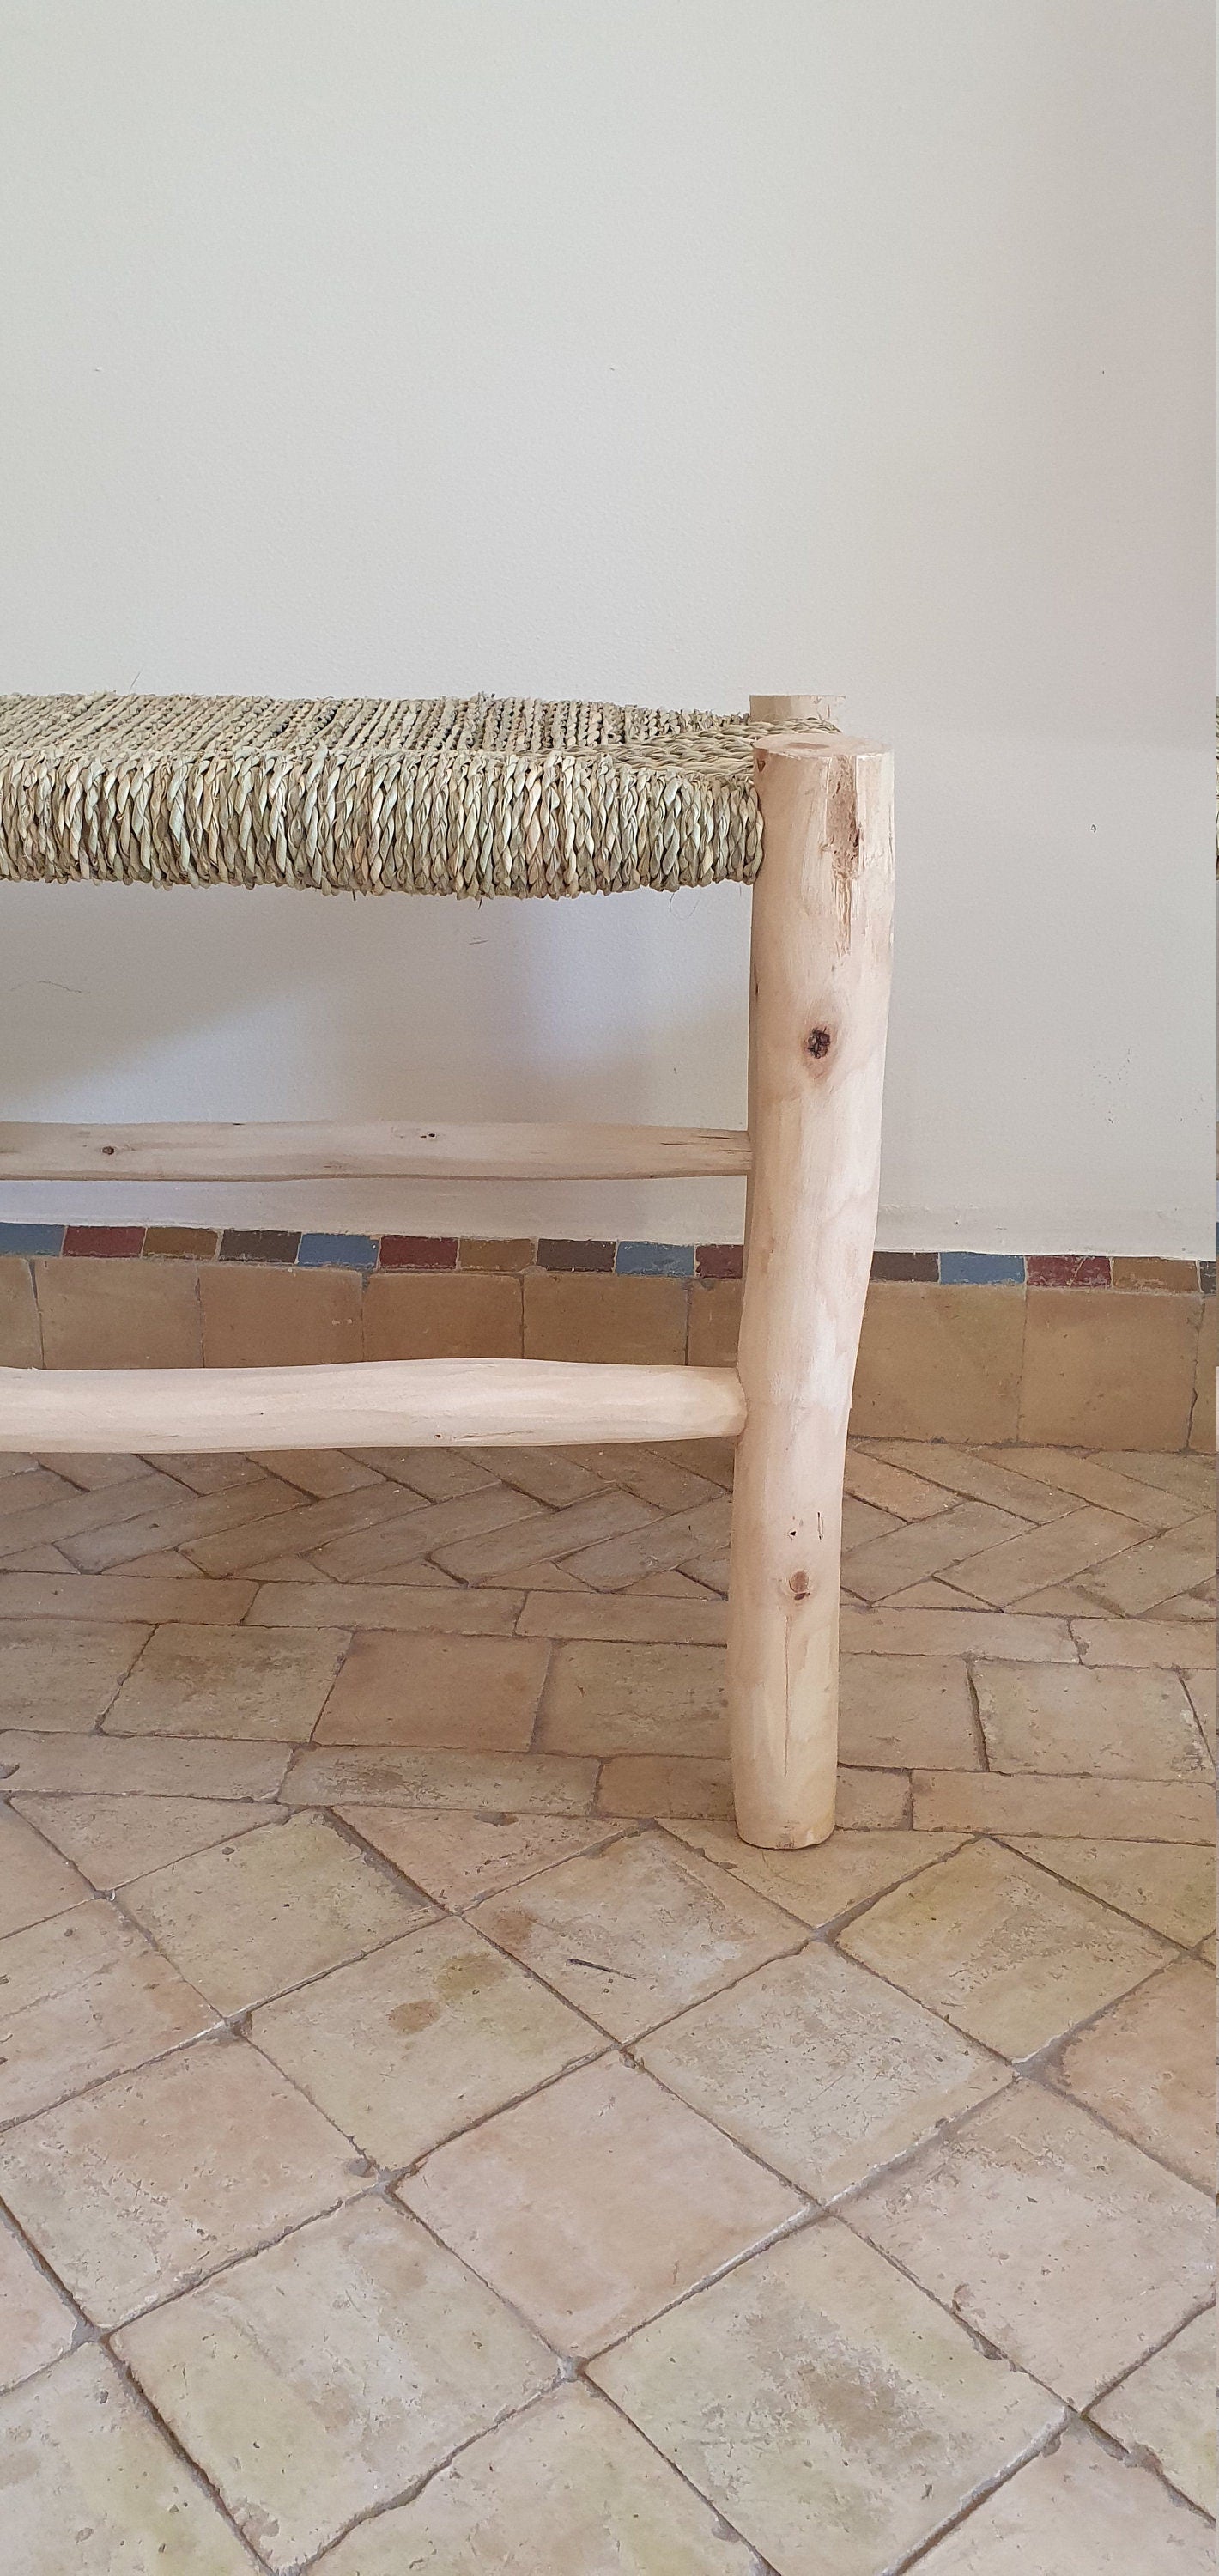 A side view of a rustic wooden bench featuring intricate natural weaving on the seat and backrest.